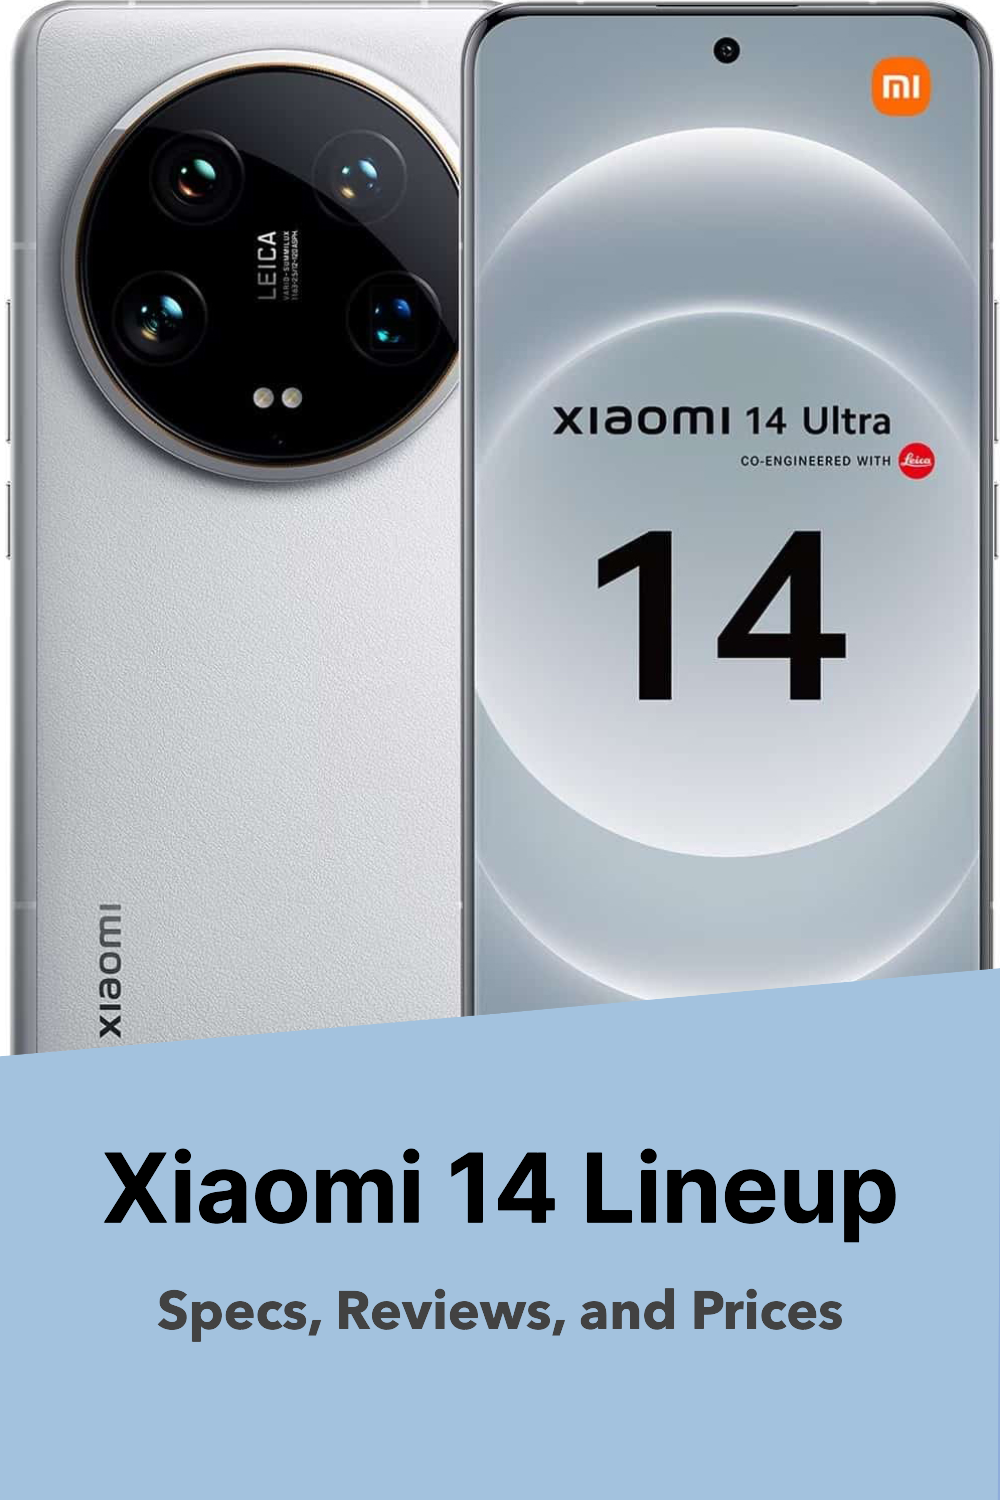 Xiaomi 14 lineup: specs, reviews and prices